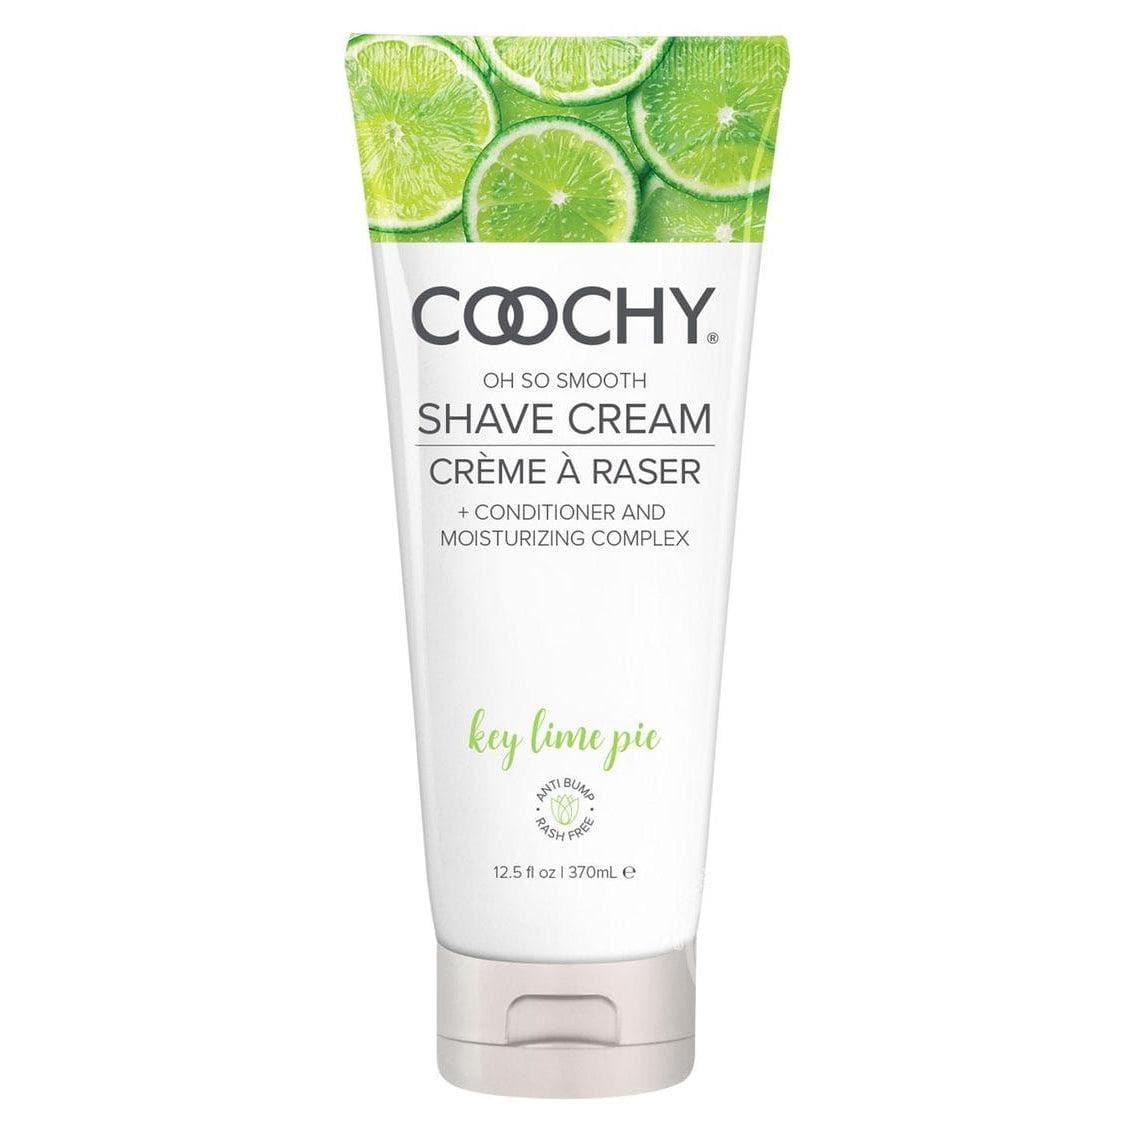 Coochy Oh So Smooth Shave Cream Key Lime Pie - Romantic Blessings